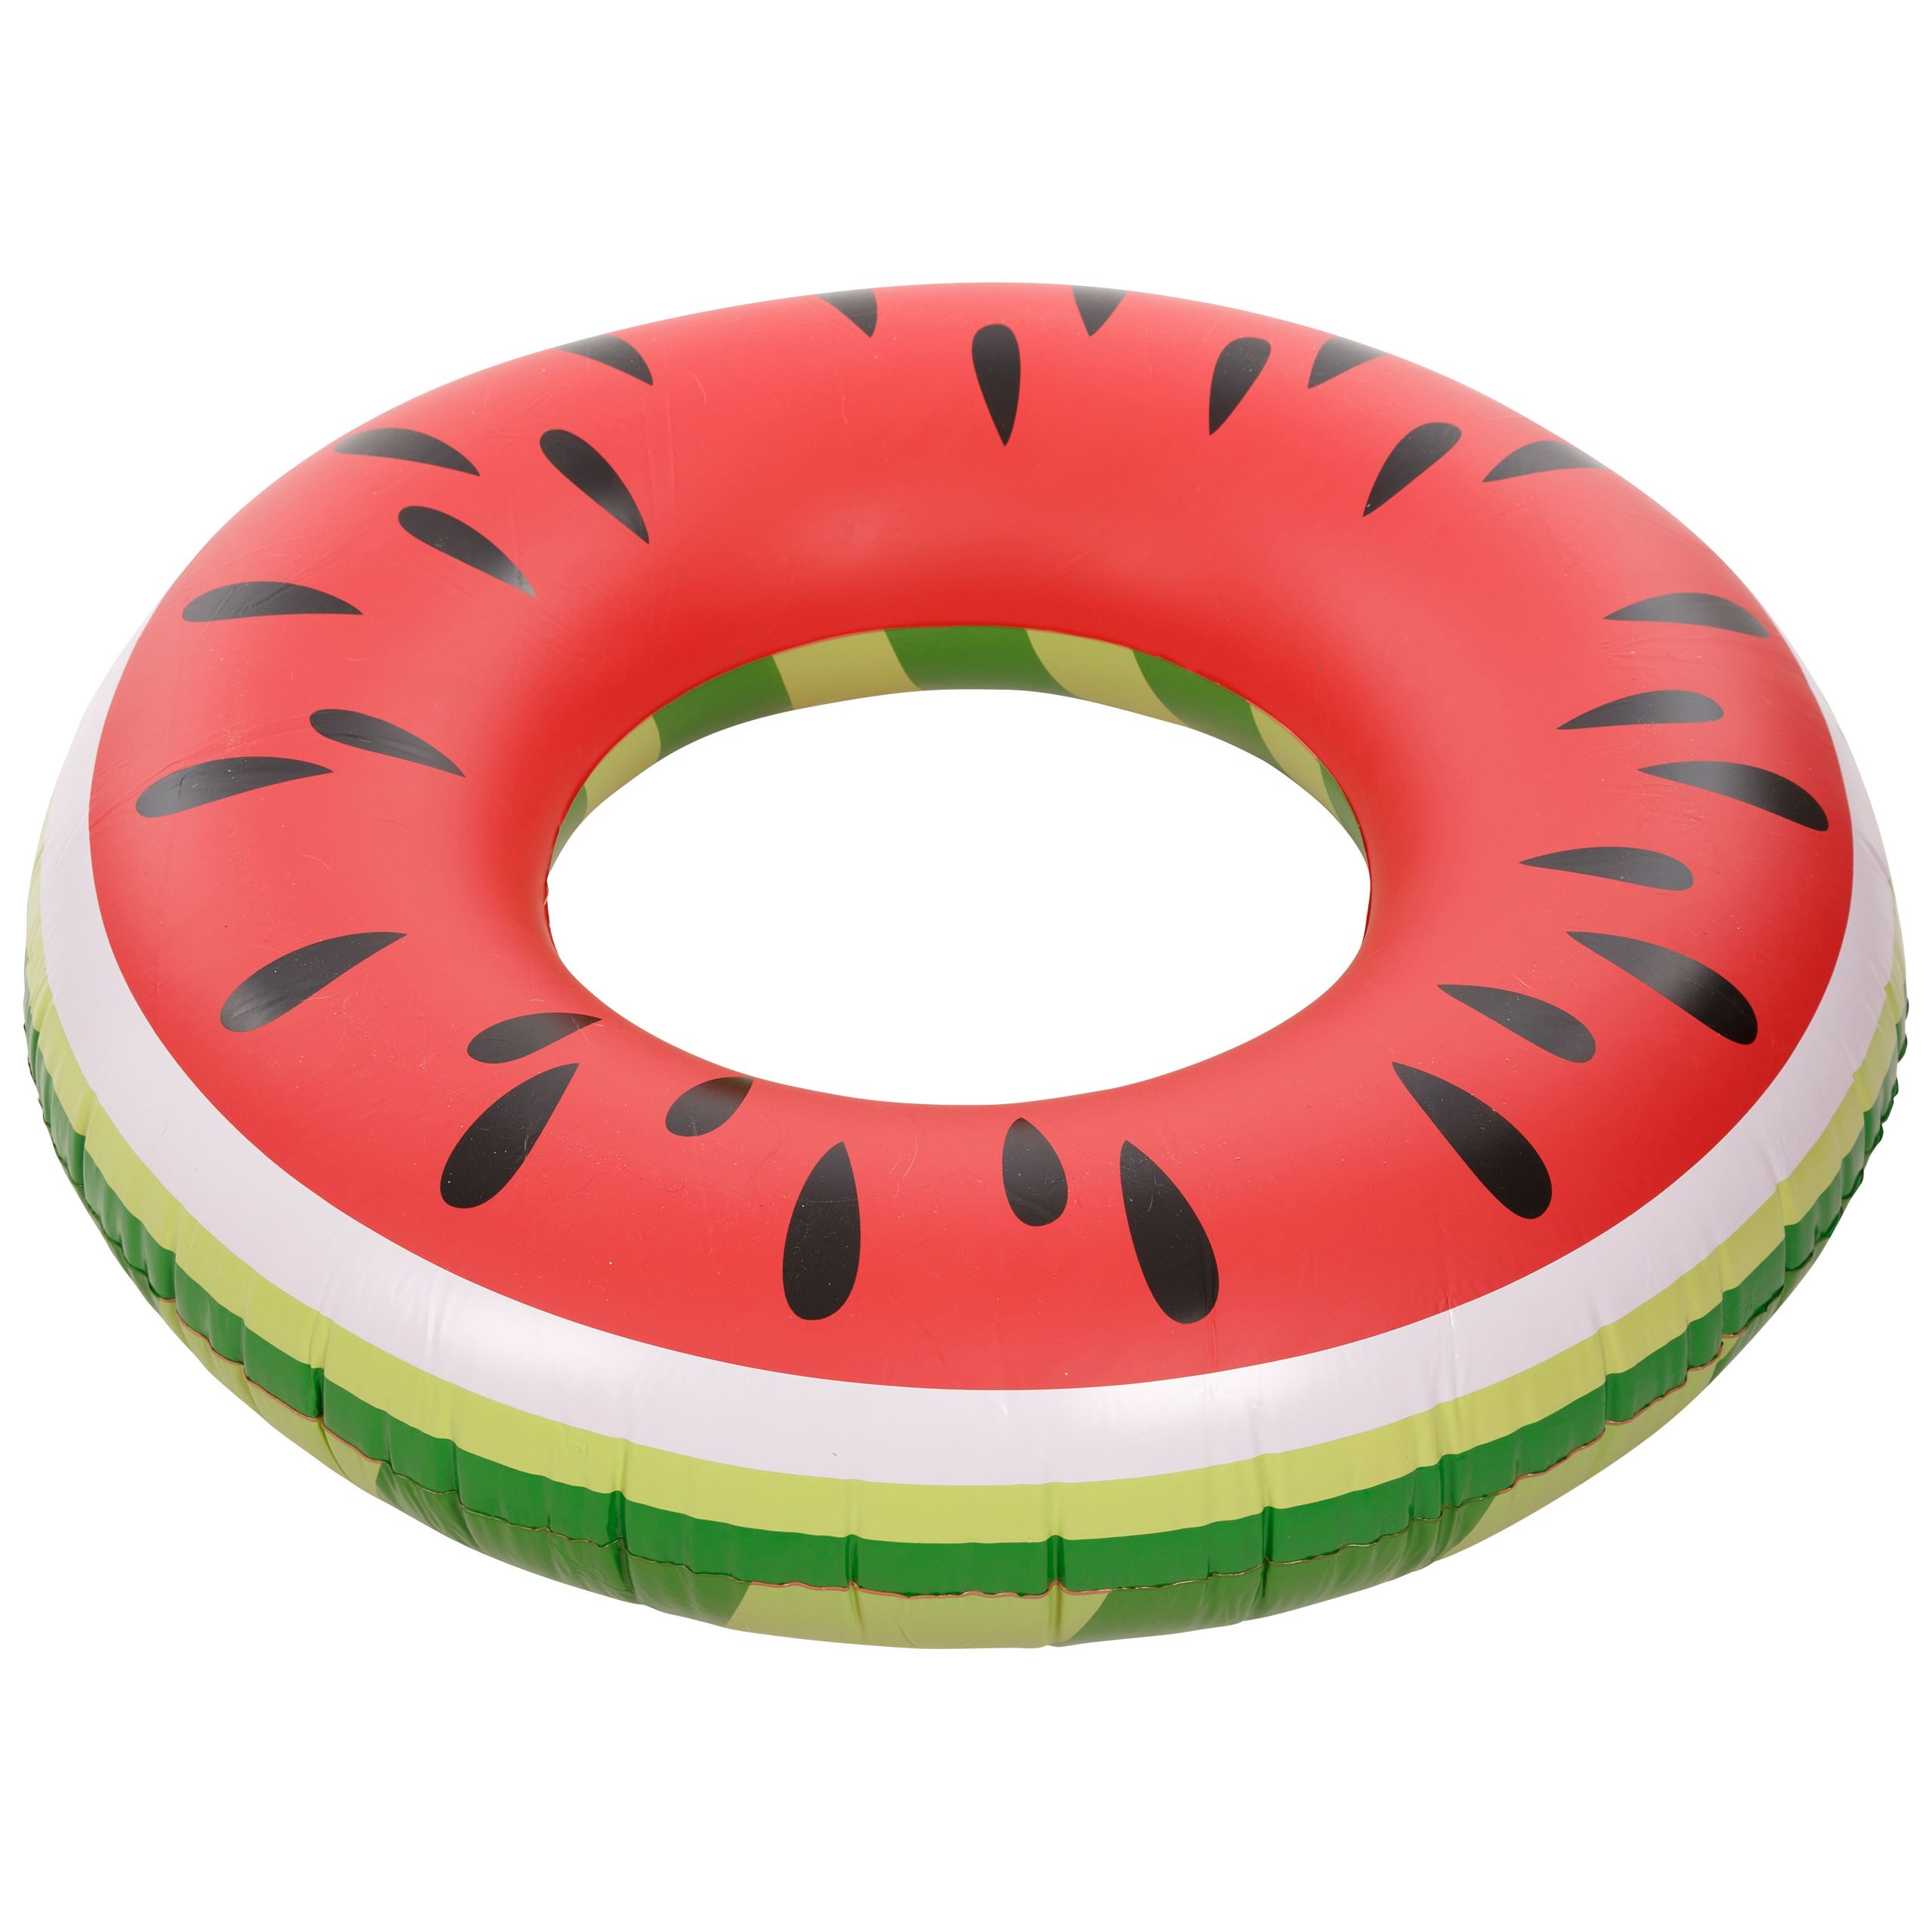 Inflatable Watermelon Novelty Swim Ring